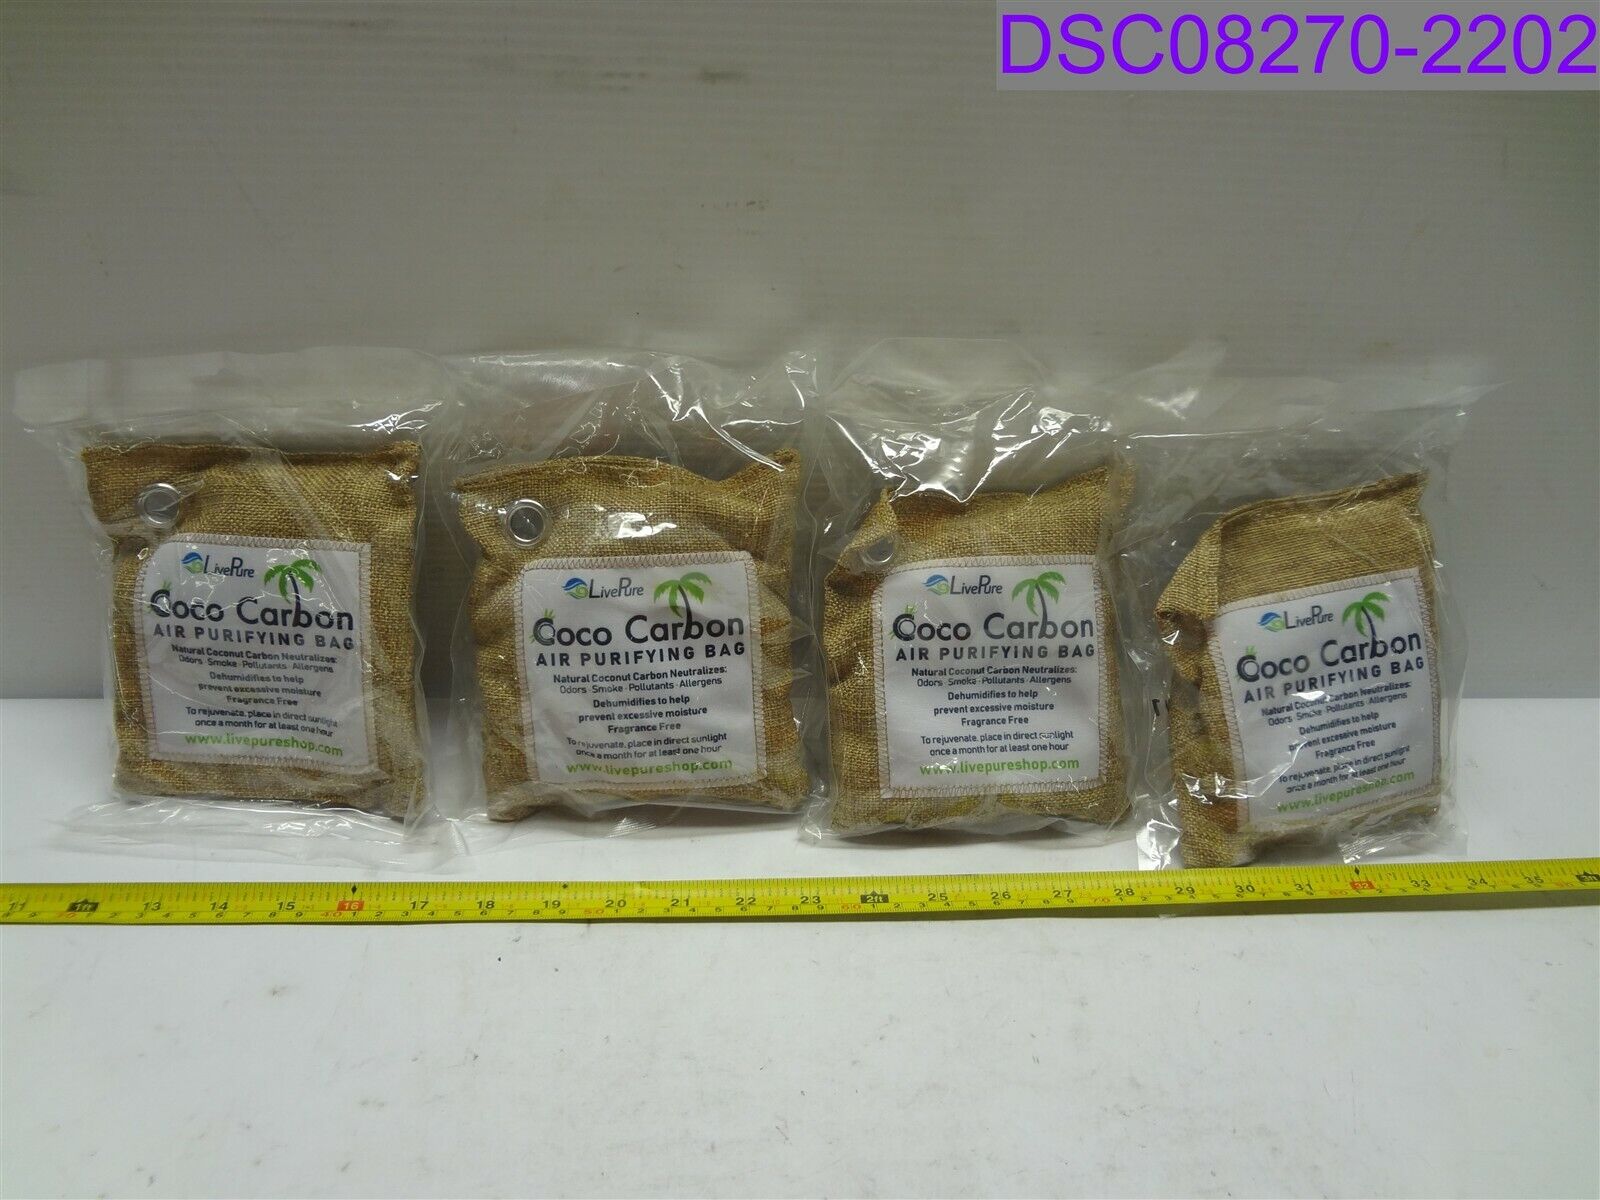 Qty = 10: Live Pure Coco Carbon Natural Air Purifying Deodorizer Bags (2  Sizes)